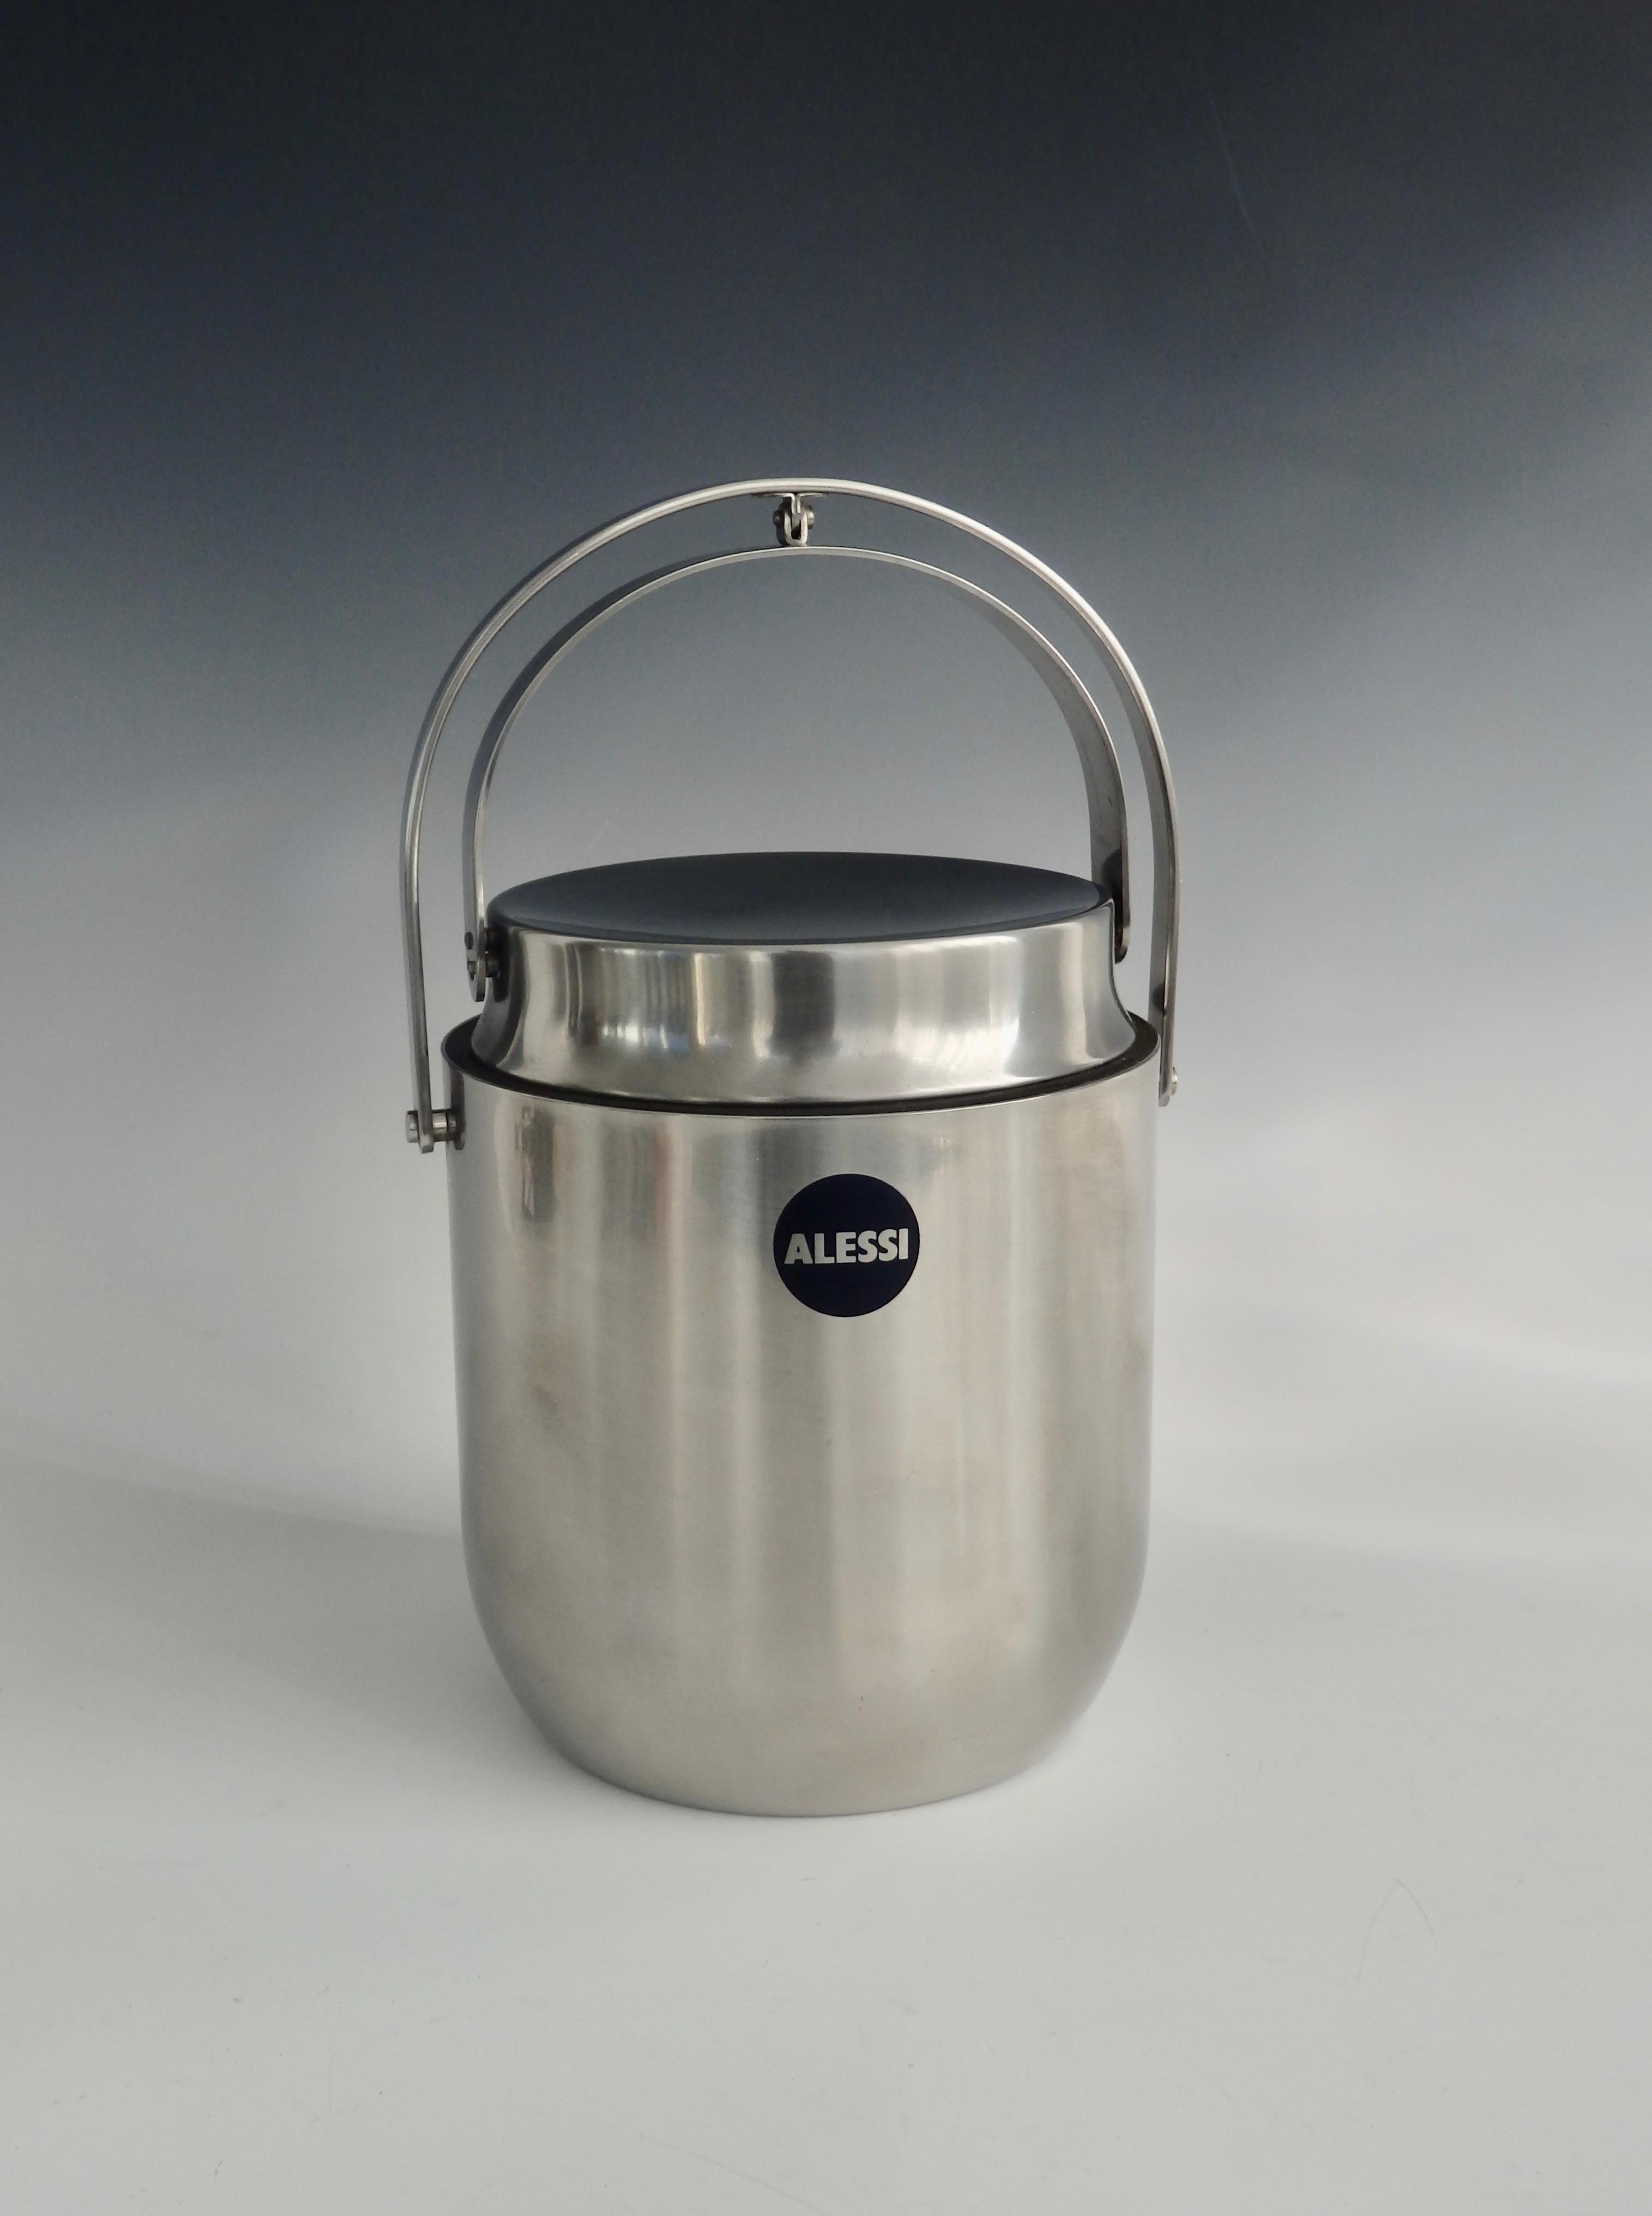 Alessi stainless steel with lid that retracts with the handle. Does have an interior lining. Add 3.75 for handle mechanism for a total of 11 tall.